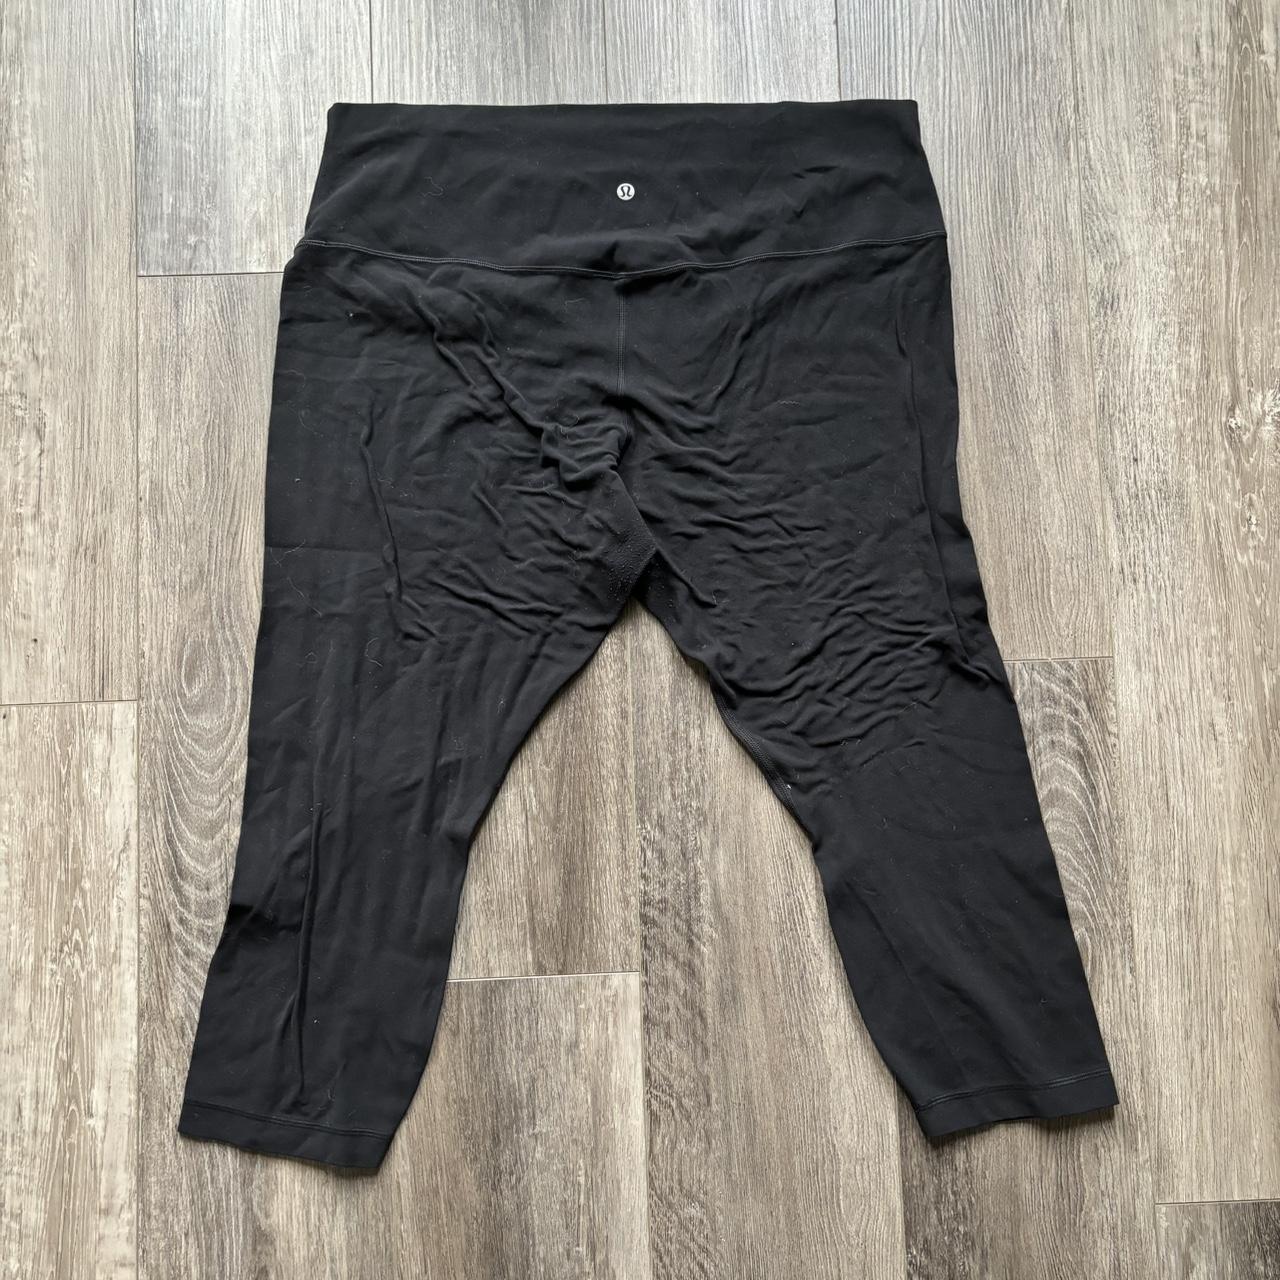 Lululemon align cropped. Size 18. Great condition